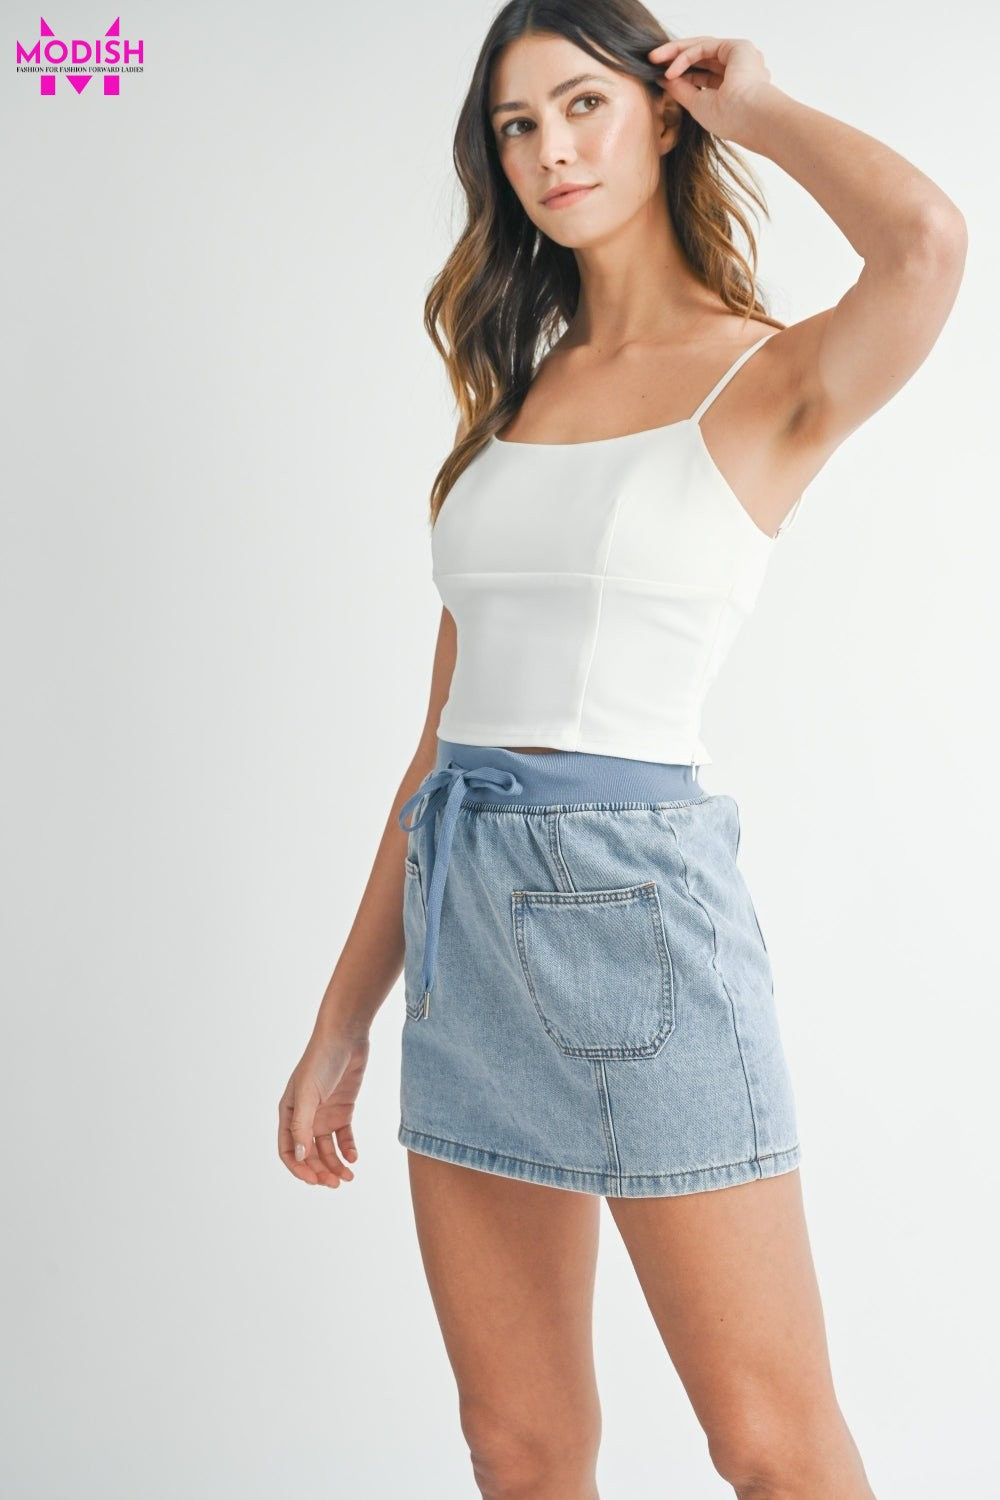 MABLE Strappy Back Cropped Cami - Modish